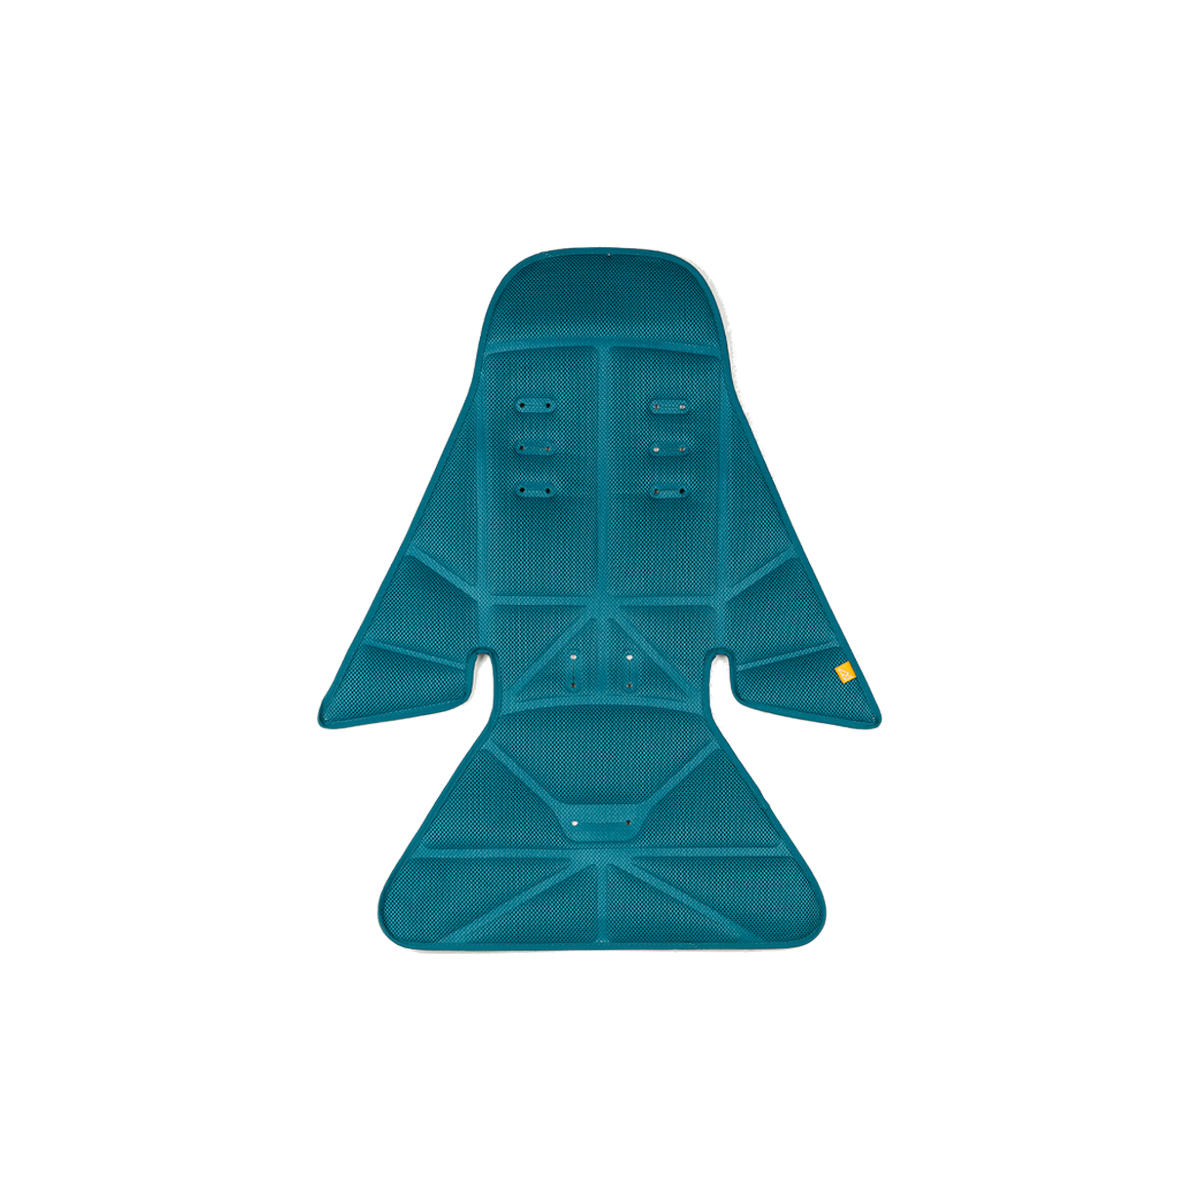 Assise_micralite_fastfold_turquoise